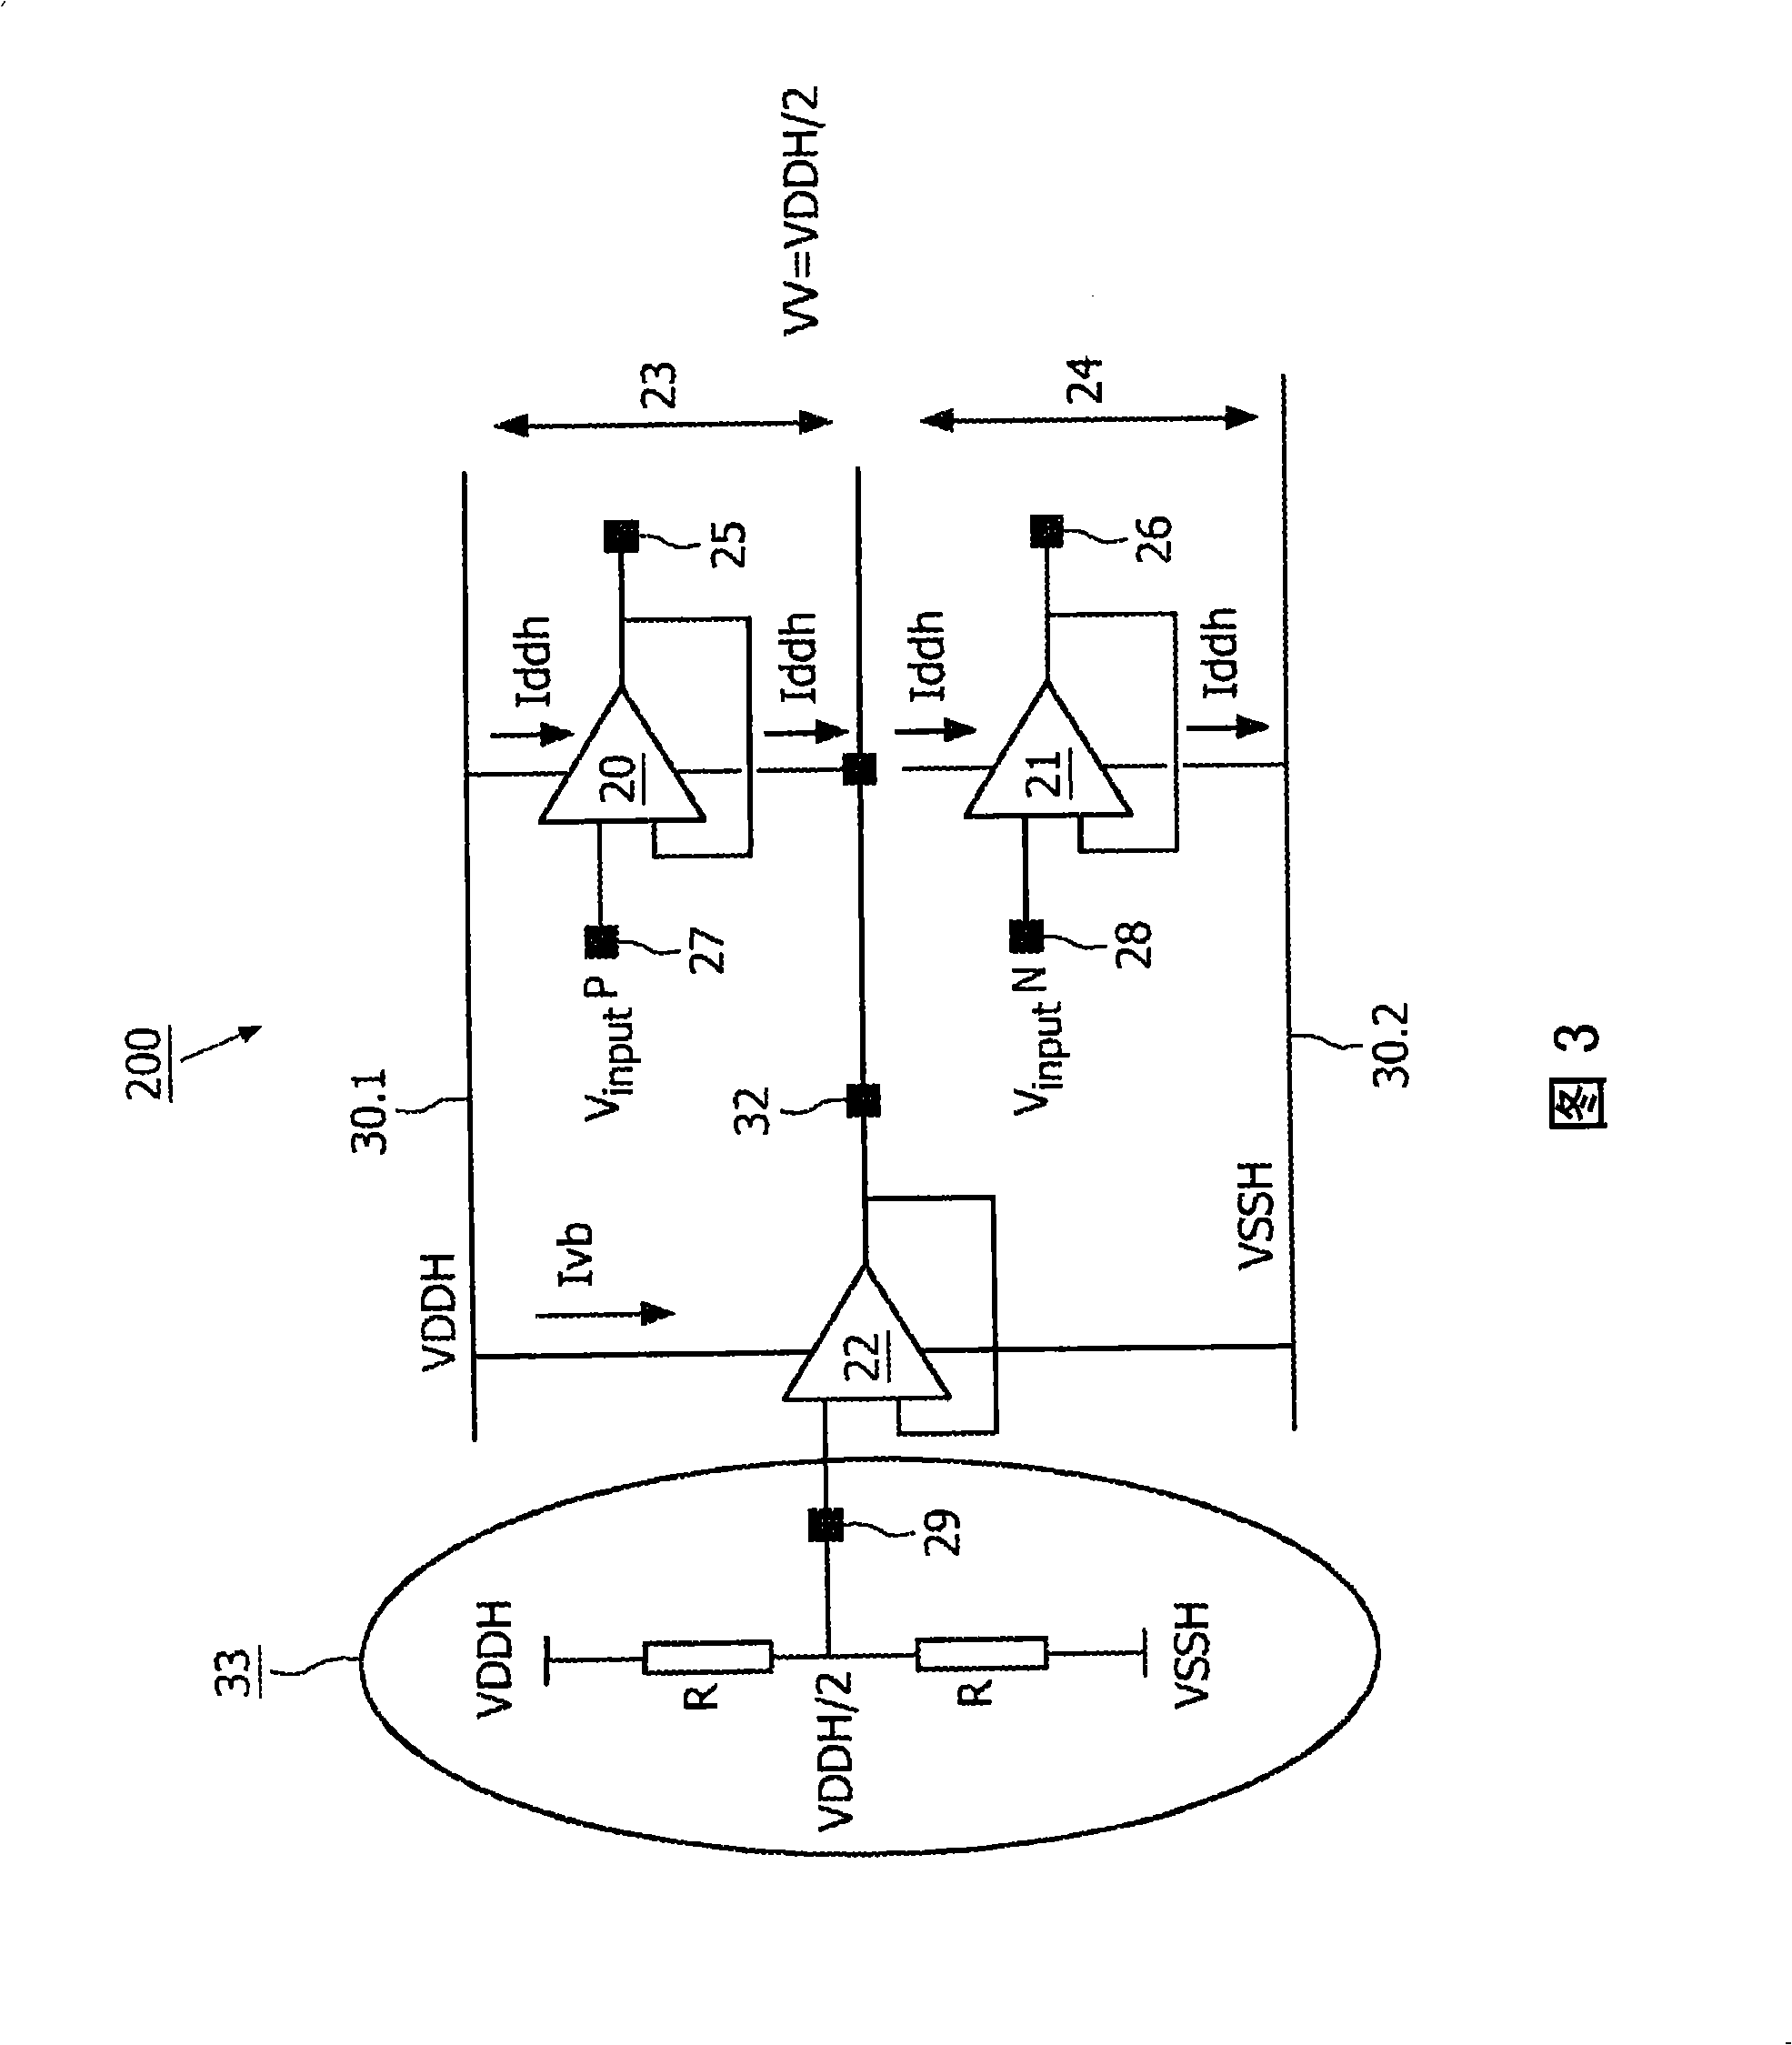 Apparatus for driving an LCD display with reduced power consumption